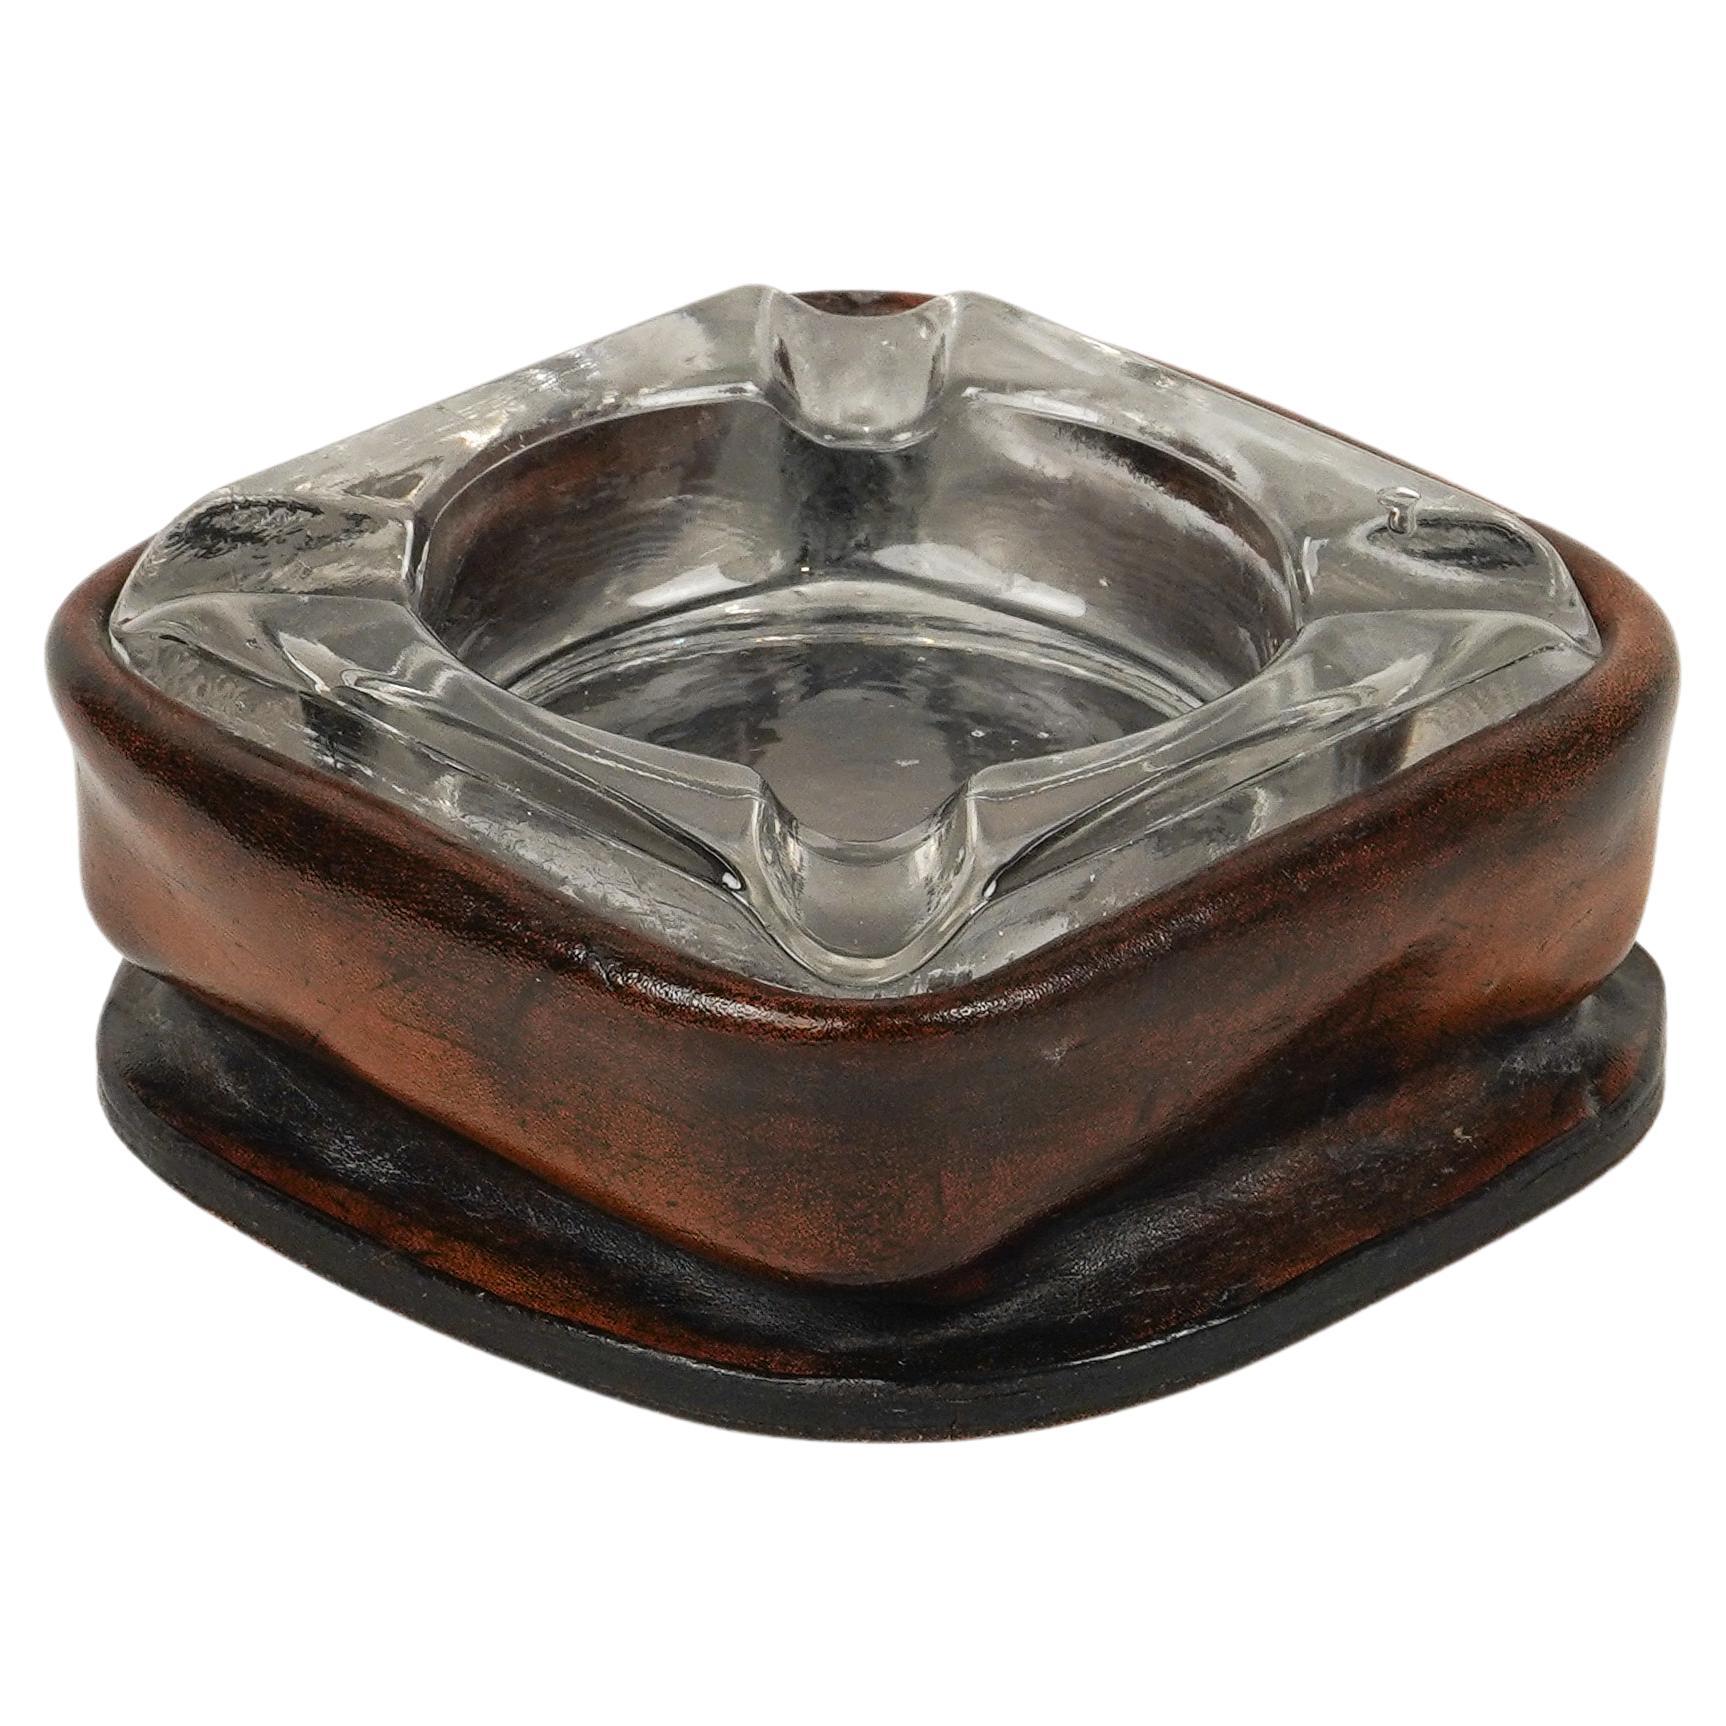 Midcentury Squared Ashtray in Leather and Glass Jacques Adnet Style, Italy 1970s